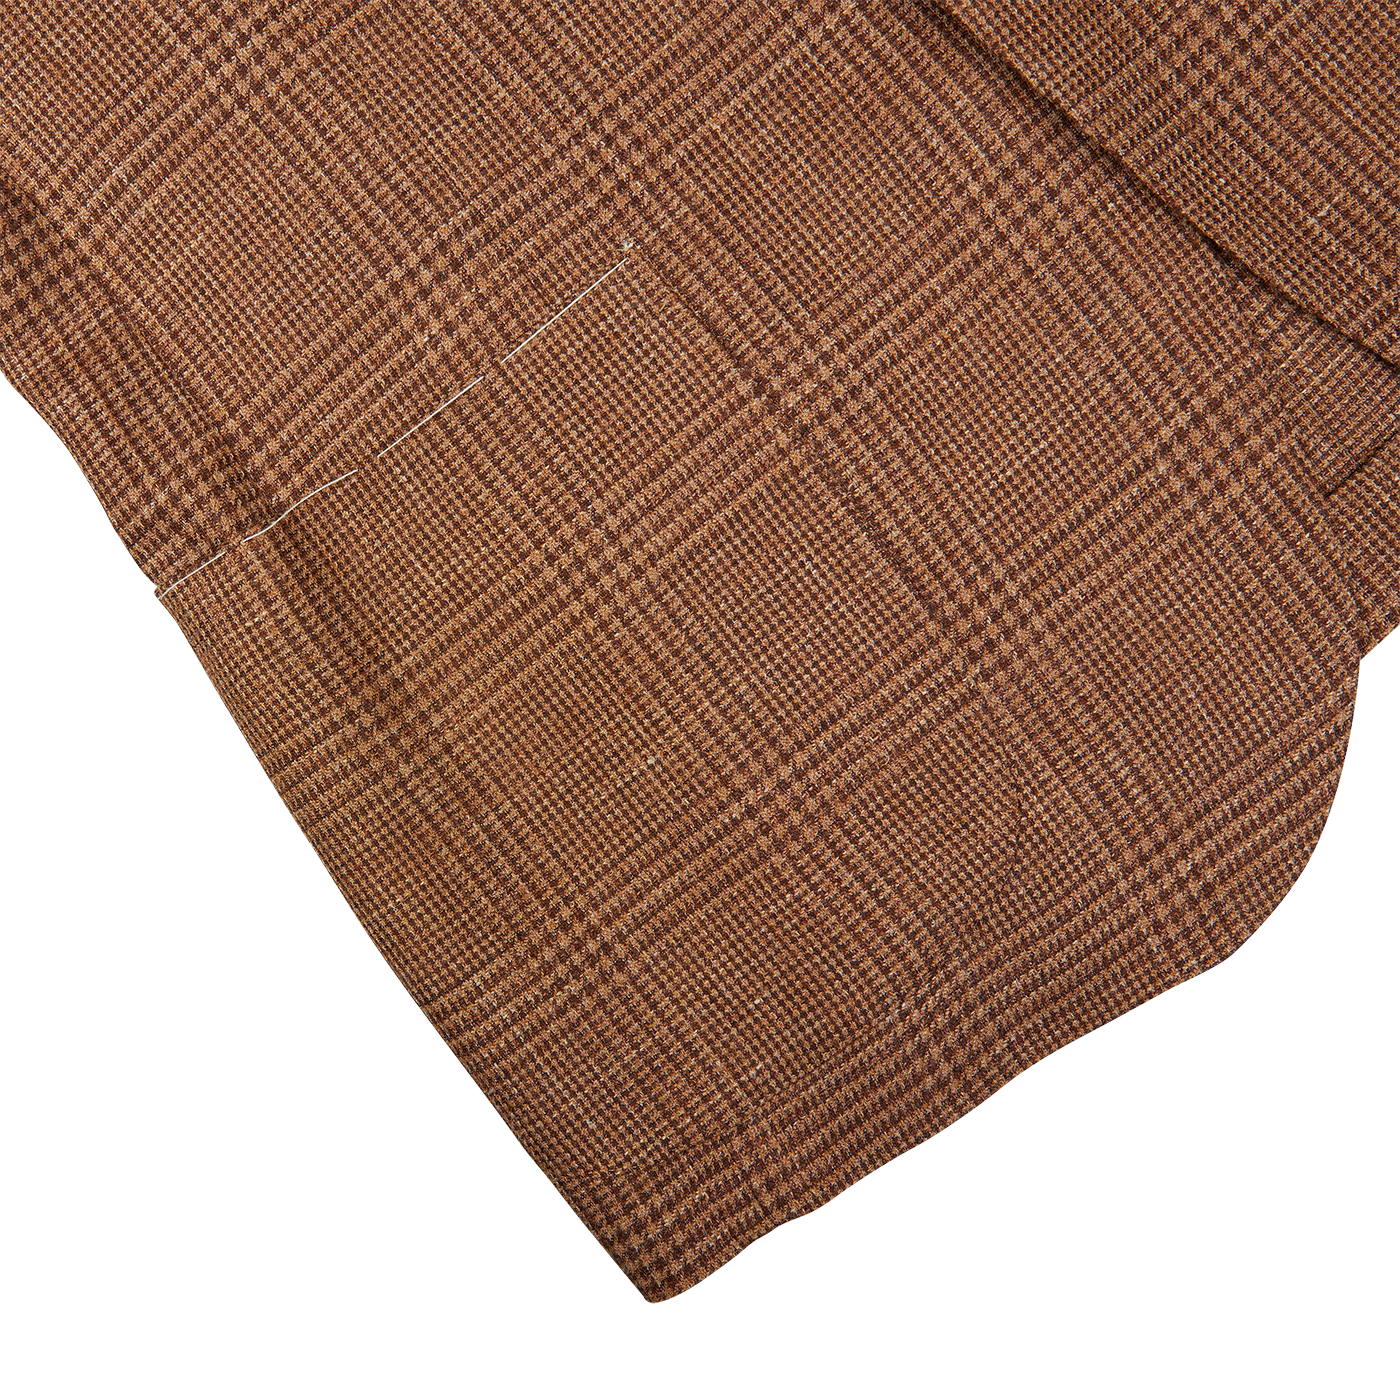 Brown fabric placemats with checked pattern on a striped cream and brown tabletop were replaced with De Petrillo Brown Checked Wool Silk Linen Posillipo Blazer.